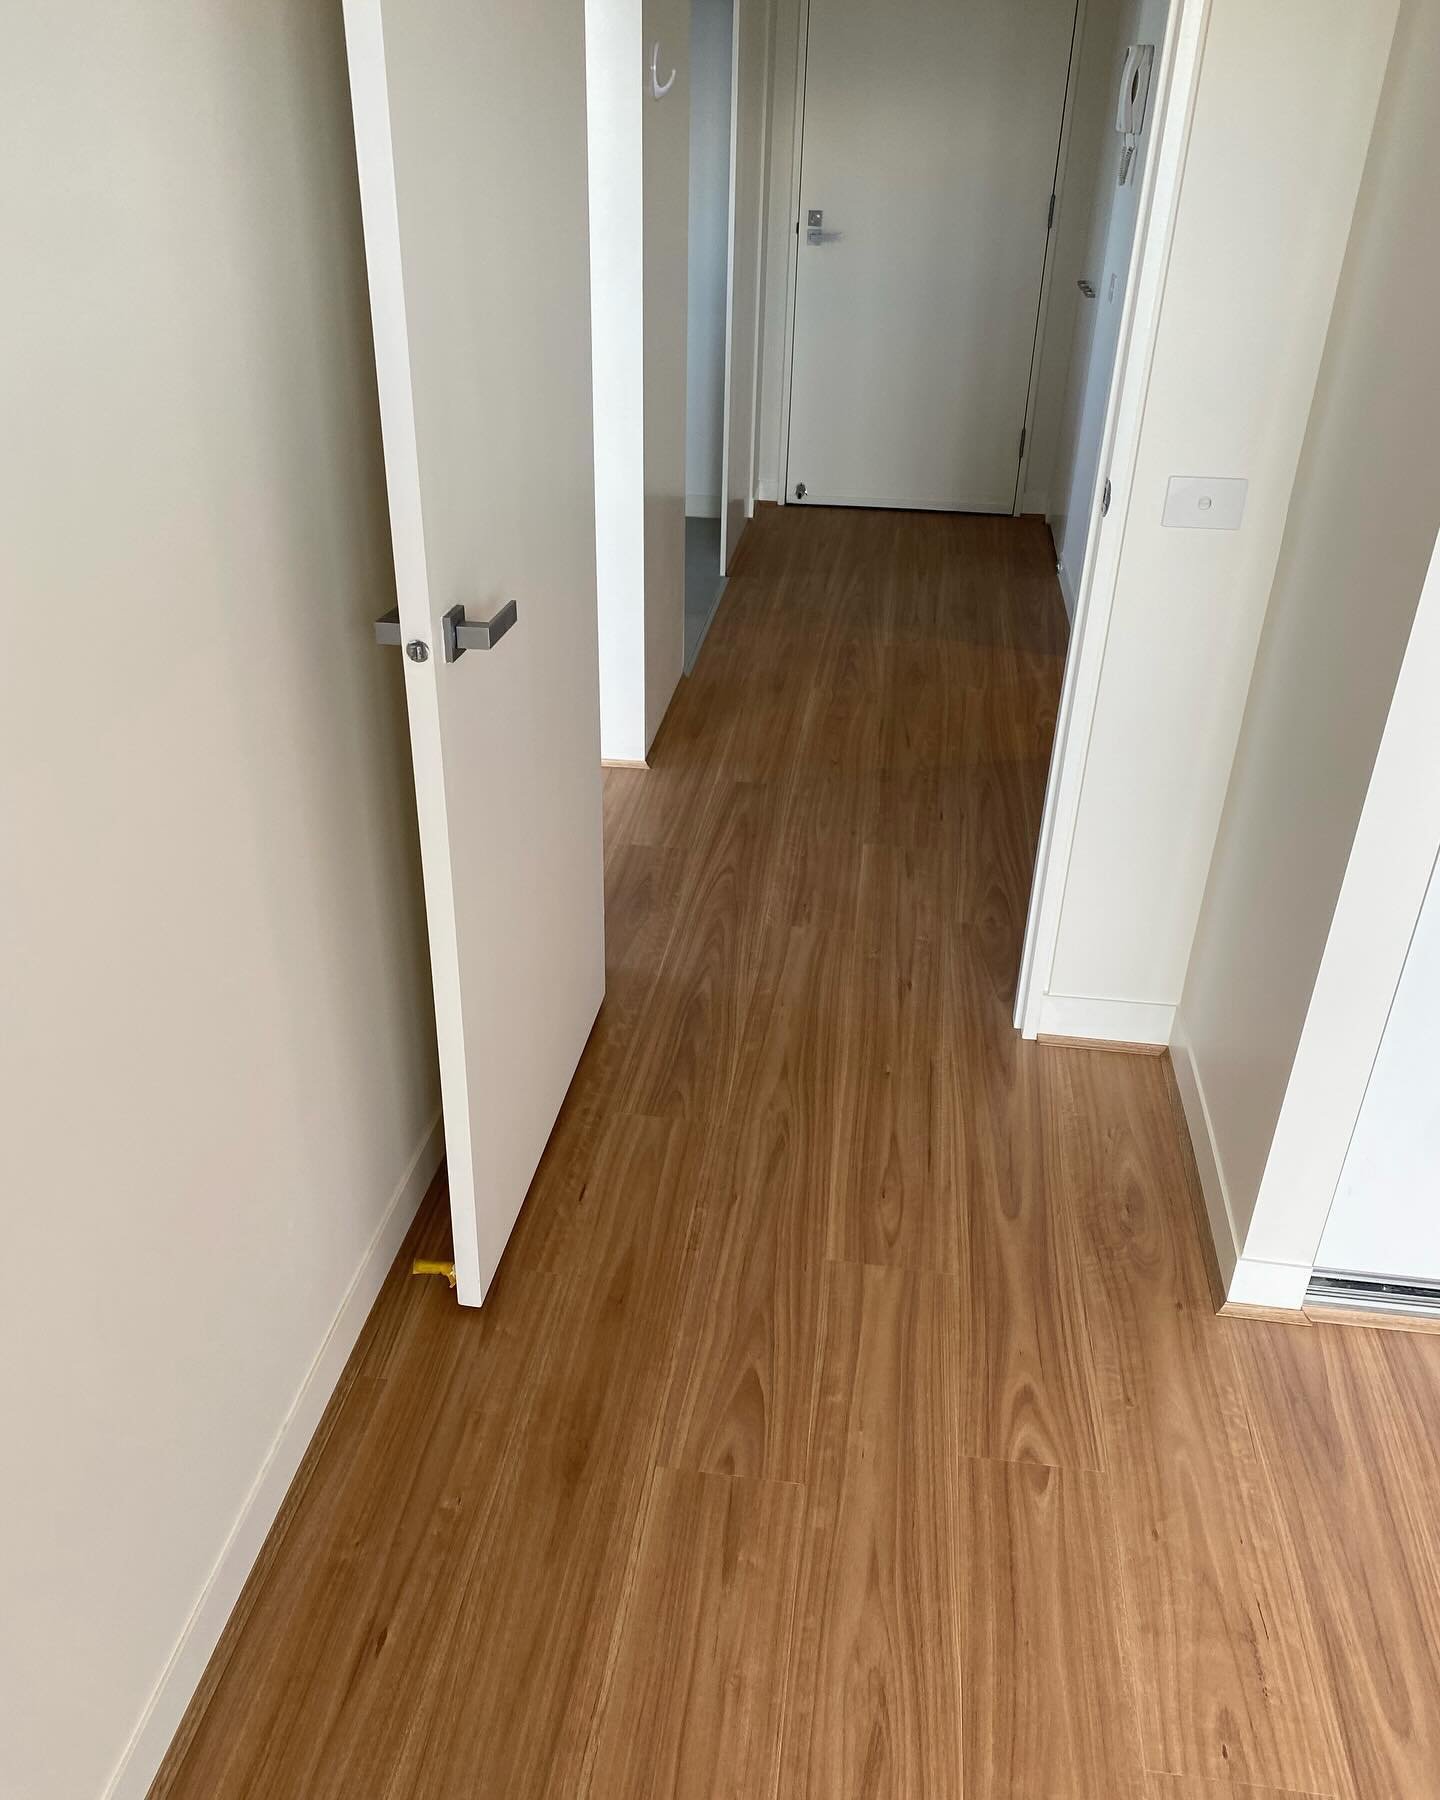 LAMINATE JOB COMPLETED  by Floorworld Camberwell. Looks fabulous!!! So easy to maintain, watertight, scratch resistant and perfect for apartments, retail,  rentals. #quickstep #blackbutt #laminate #style #camberwell #flooring #interiorflooring #shopl